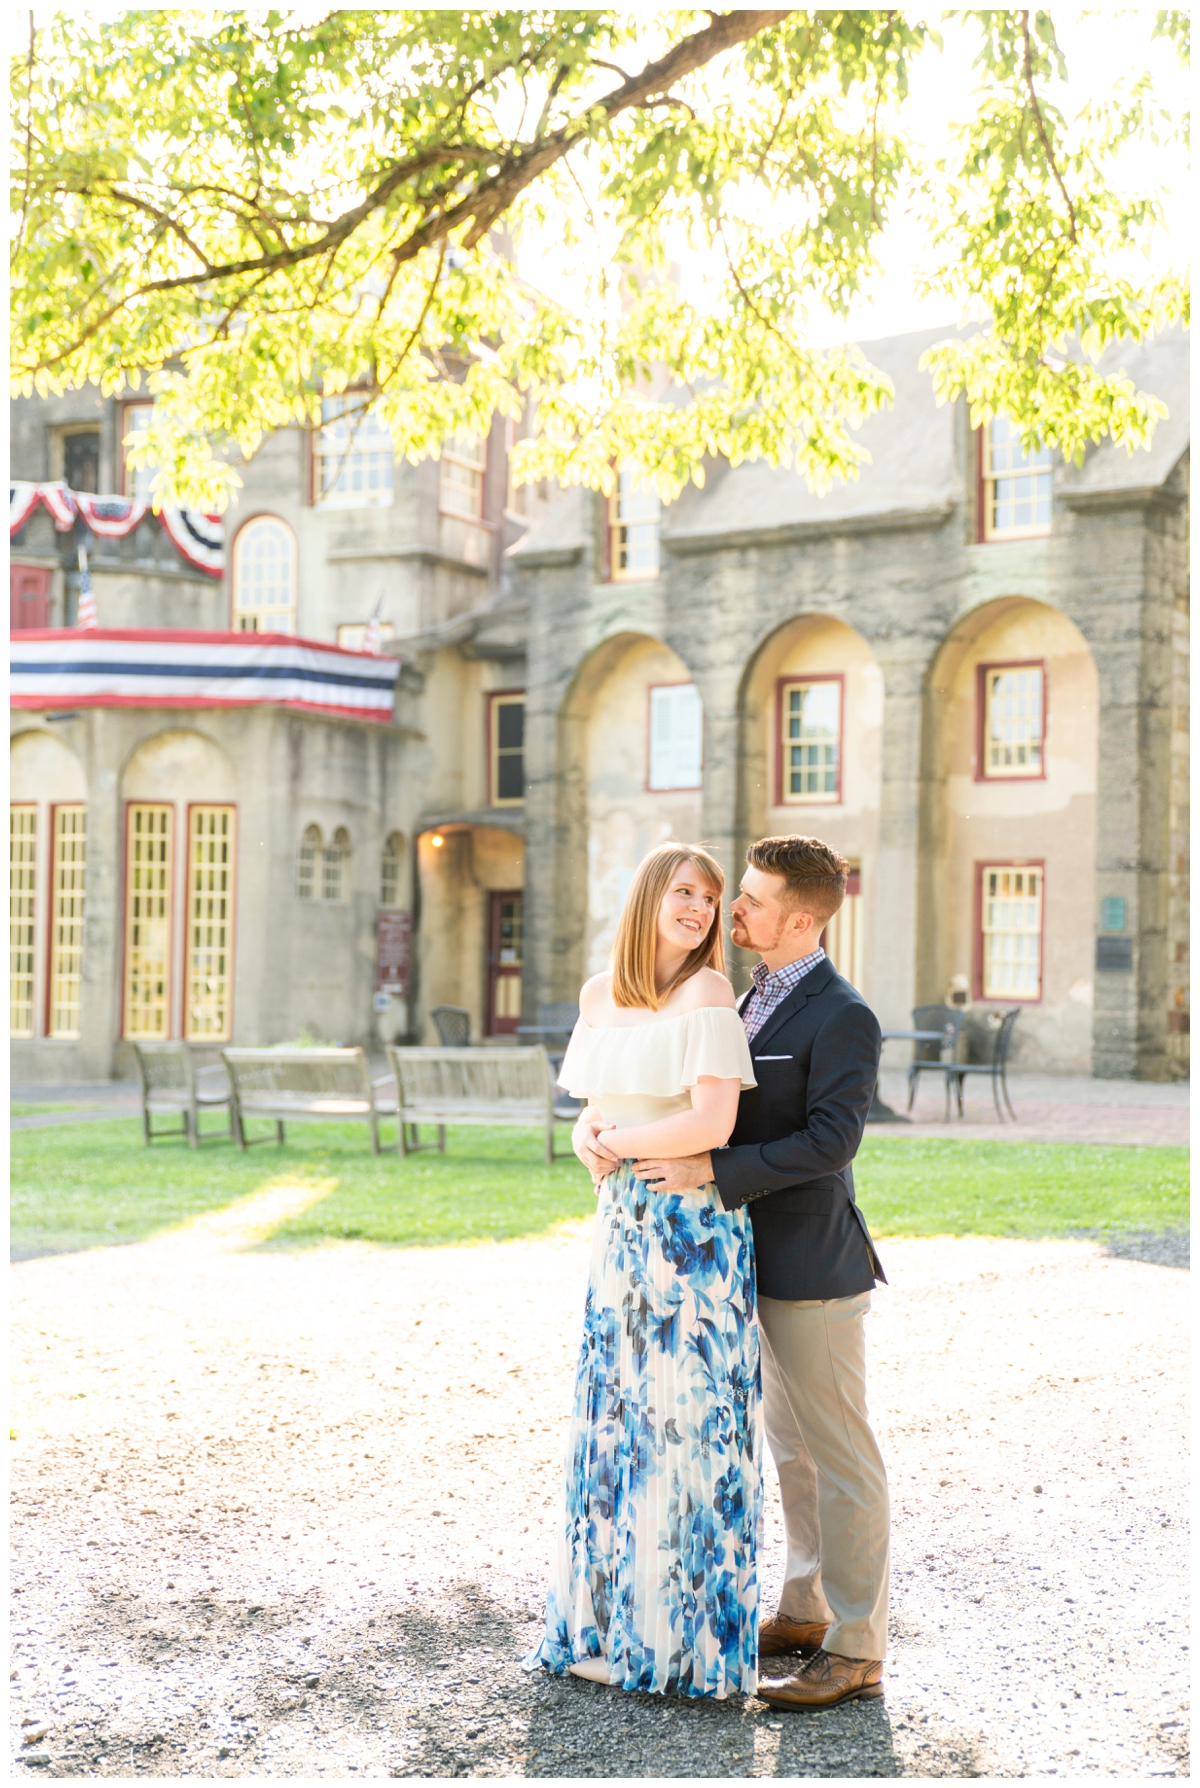 Couple hugging during engagement session at Fonthill Castle in Doylestown, PA